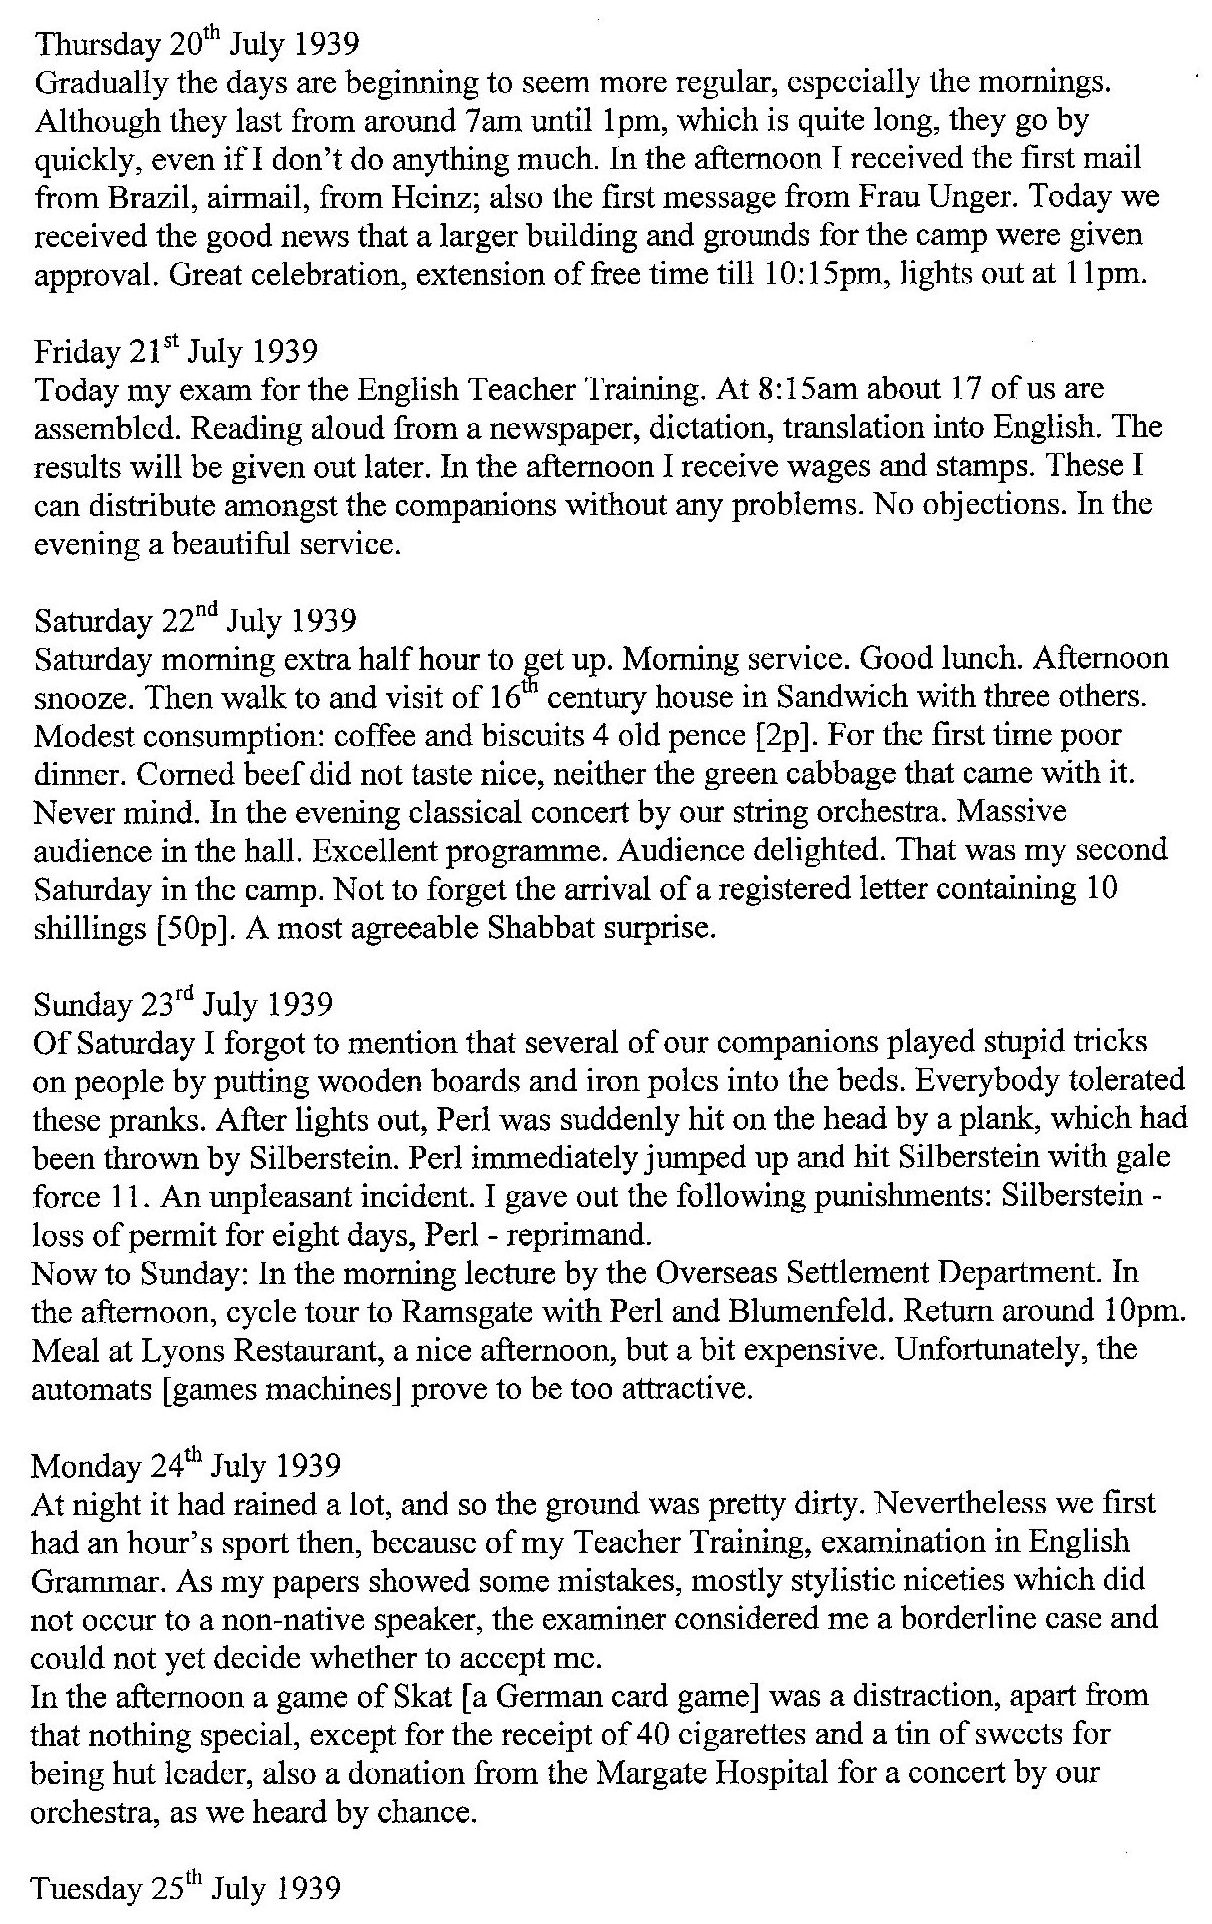 Lothar Nelken, Kitchener Camp diary, 1939 to 1940, page 3, Thursday 20 July to 24 July 1939